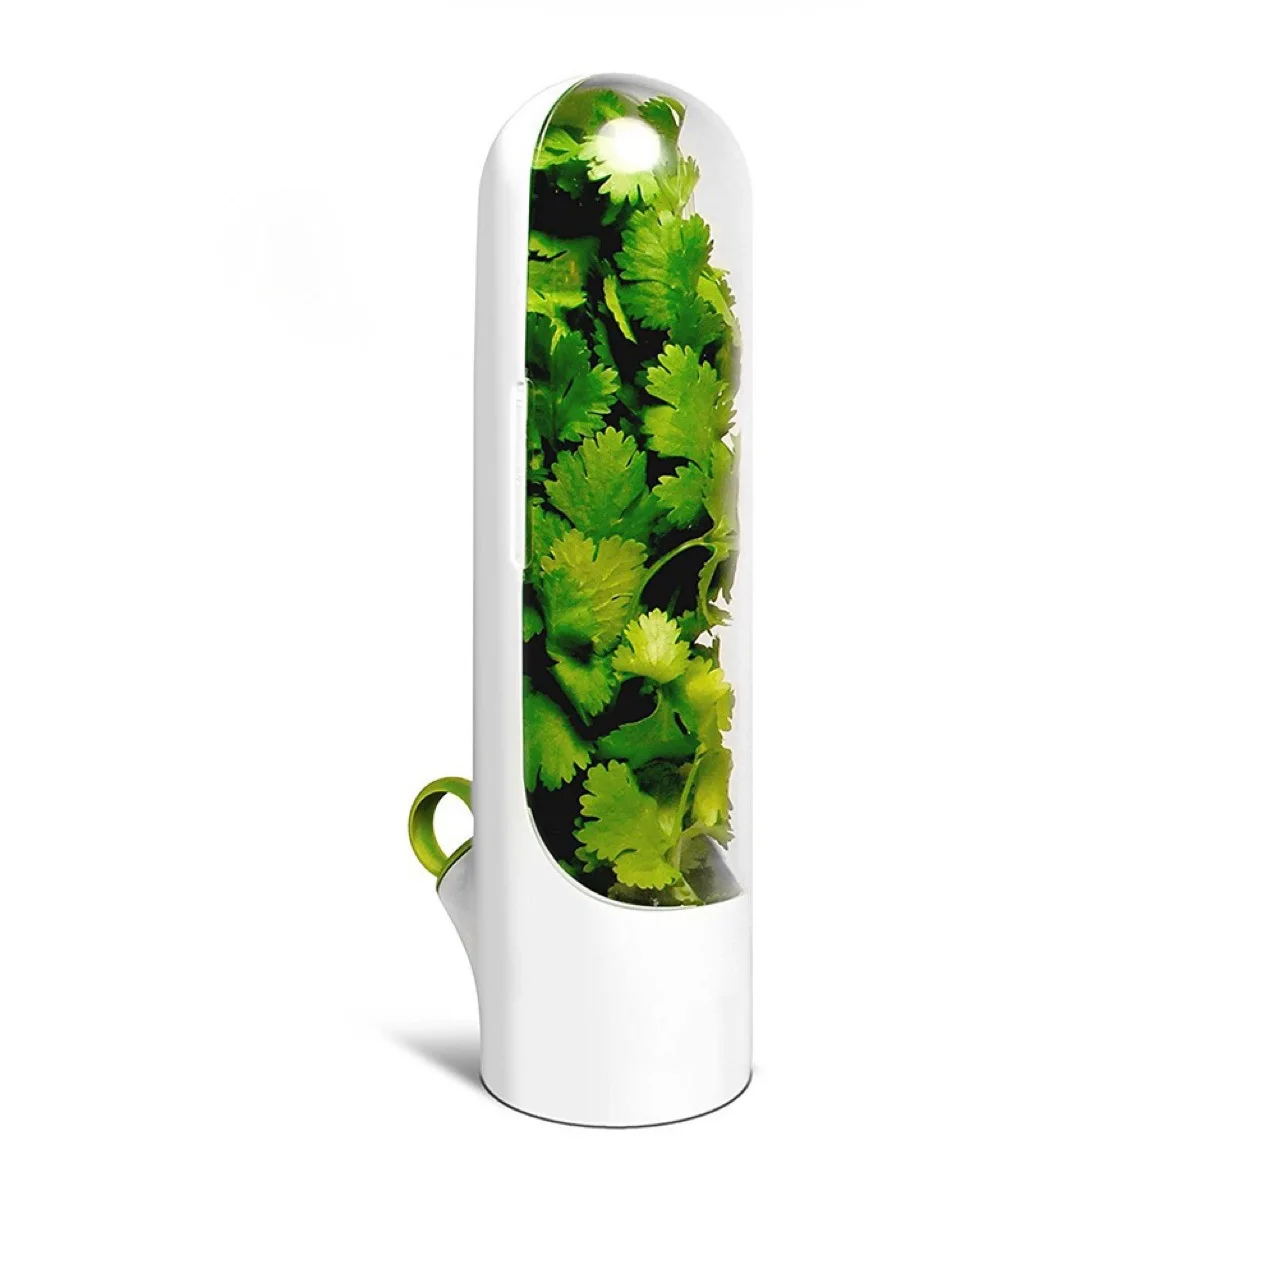 

New style herb keeper fresh herb keeper storage vegetable container fresh herb saver, White+transparent+green